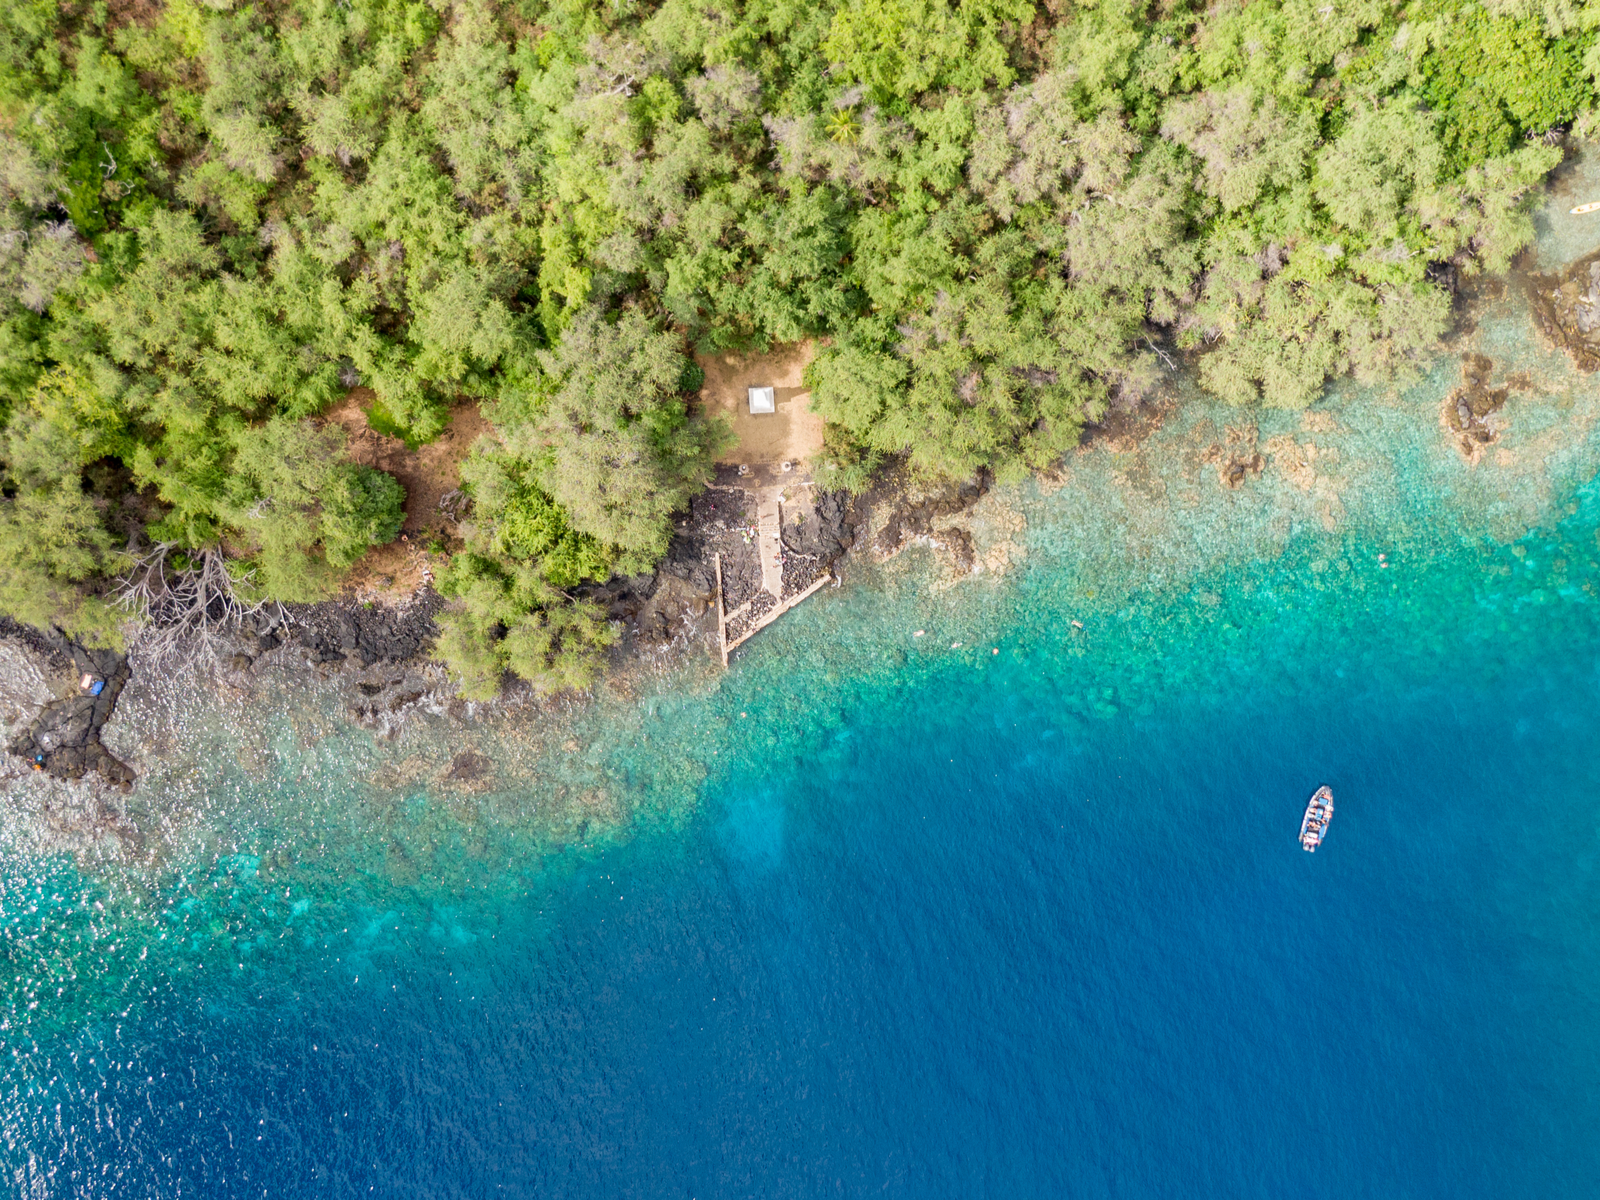 Overhead view of the stunning clear waters of Kealakekua Bay which makes it one of the best snorkeling spots in Hawaii, and of a small boat floating on the deeper waters